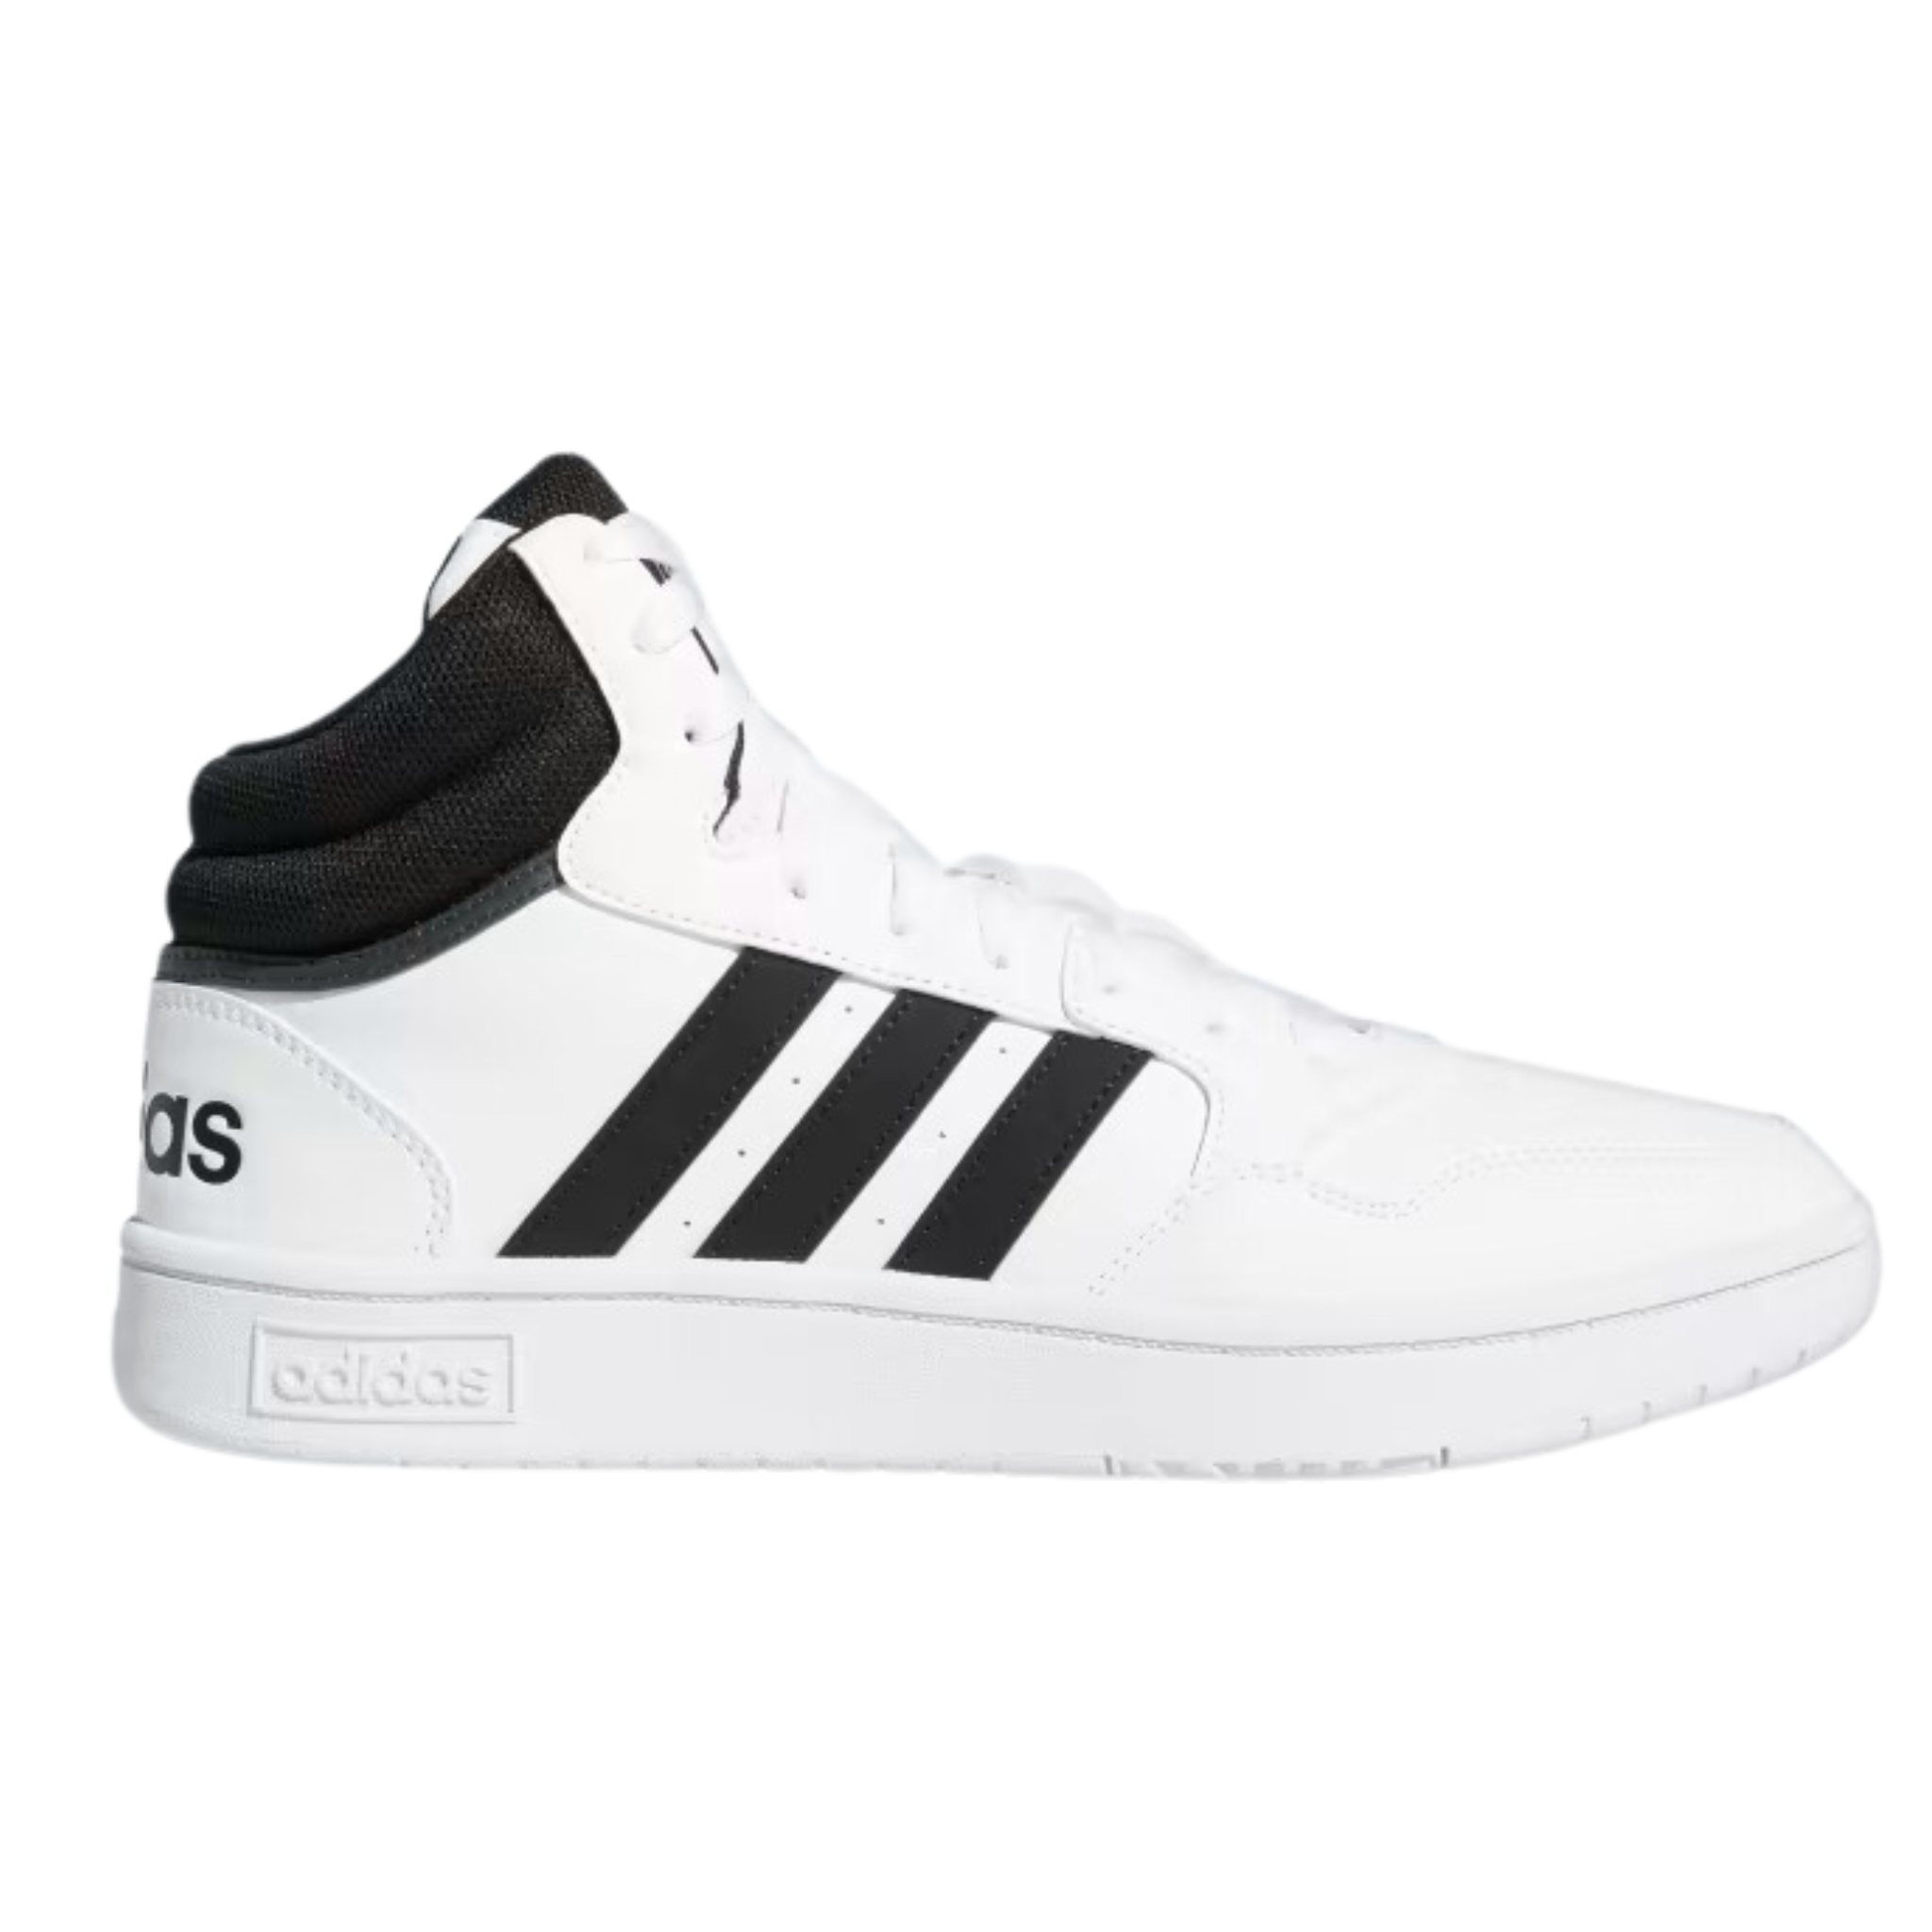 Up To 60% Off adidas Summer Sale